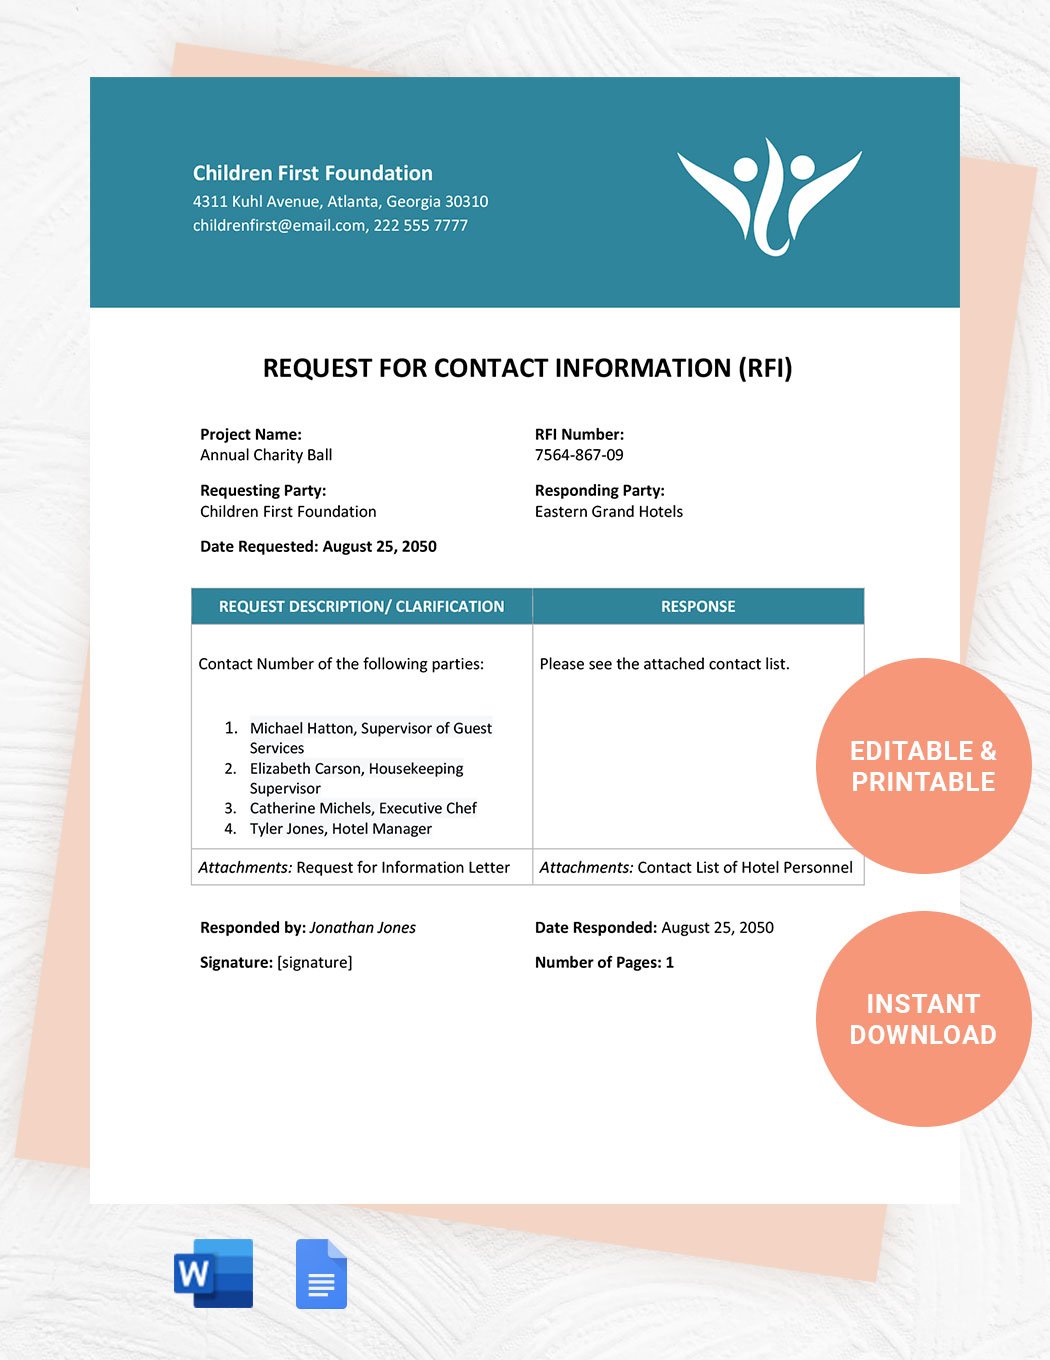 Request For Contact Information Template in Word, Google Docs